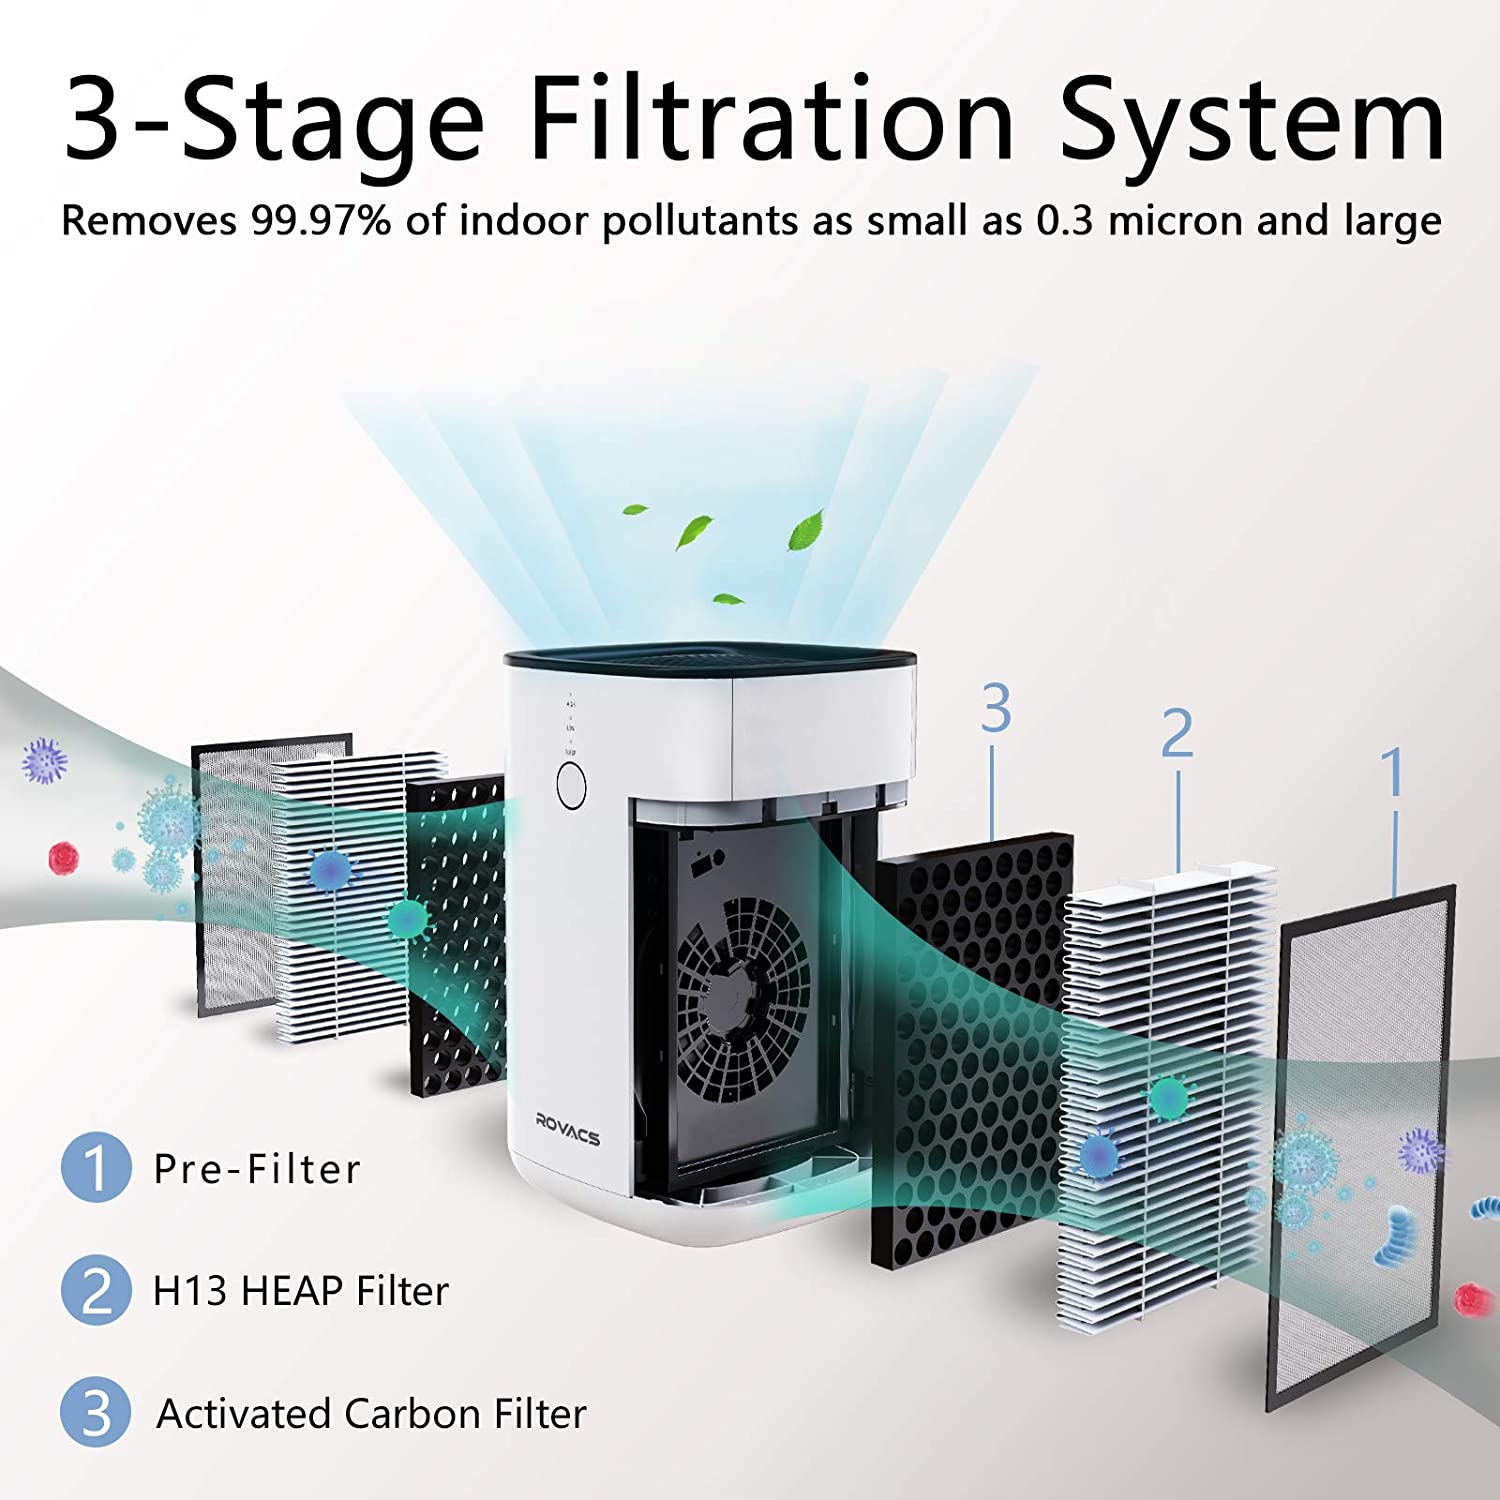 ROVACS air purifier RV60, H13 True HEPA filter, Activated carbon filter, covers 4-8㎡, CADR: 40 cfm, three fan speeds, one-key operation,double-sided air inlet and top air outlet, Adapter: DC12V, 1.0A, 10W, 26-43dB